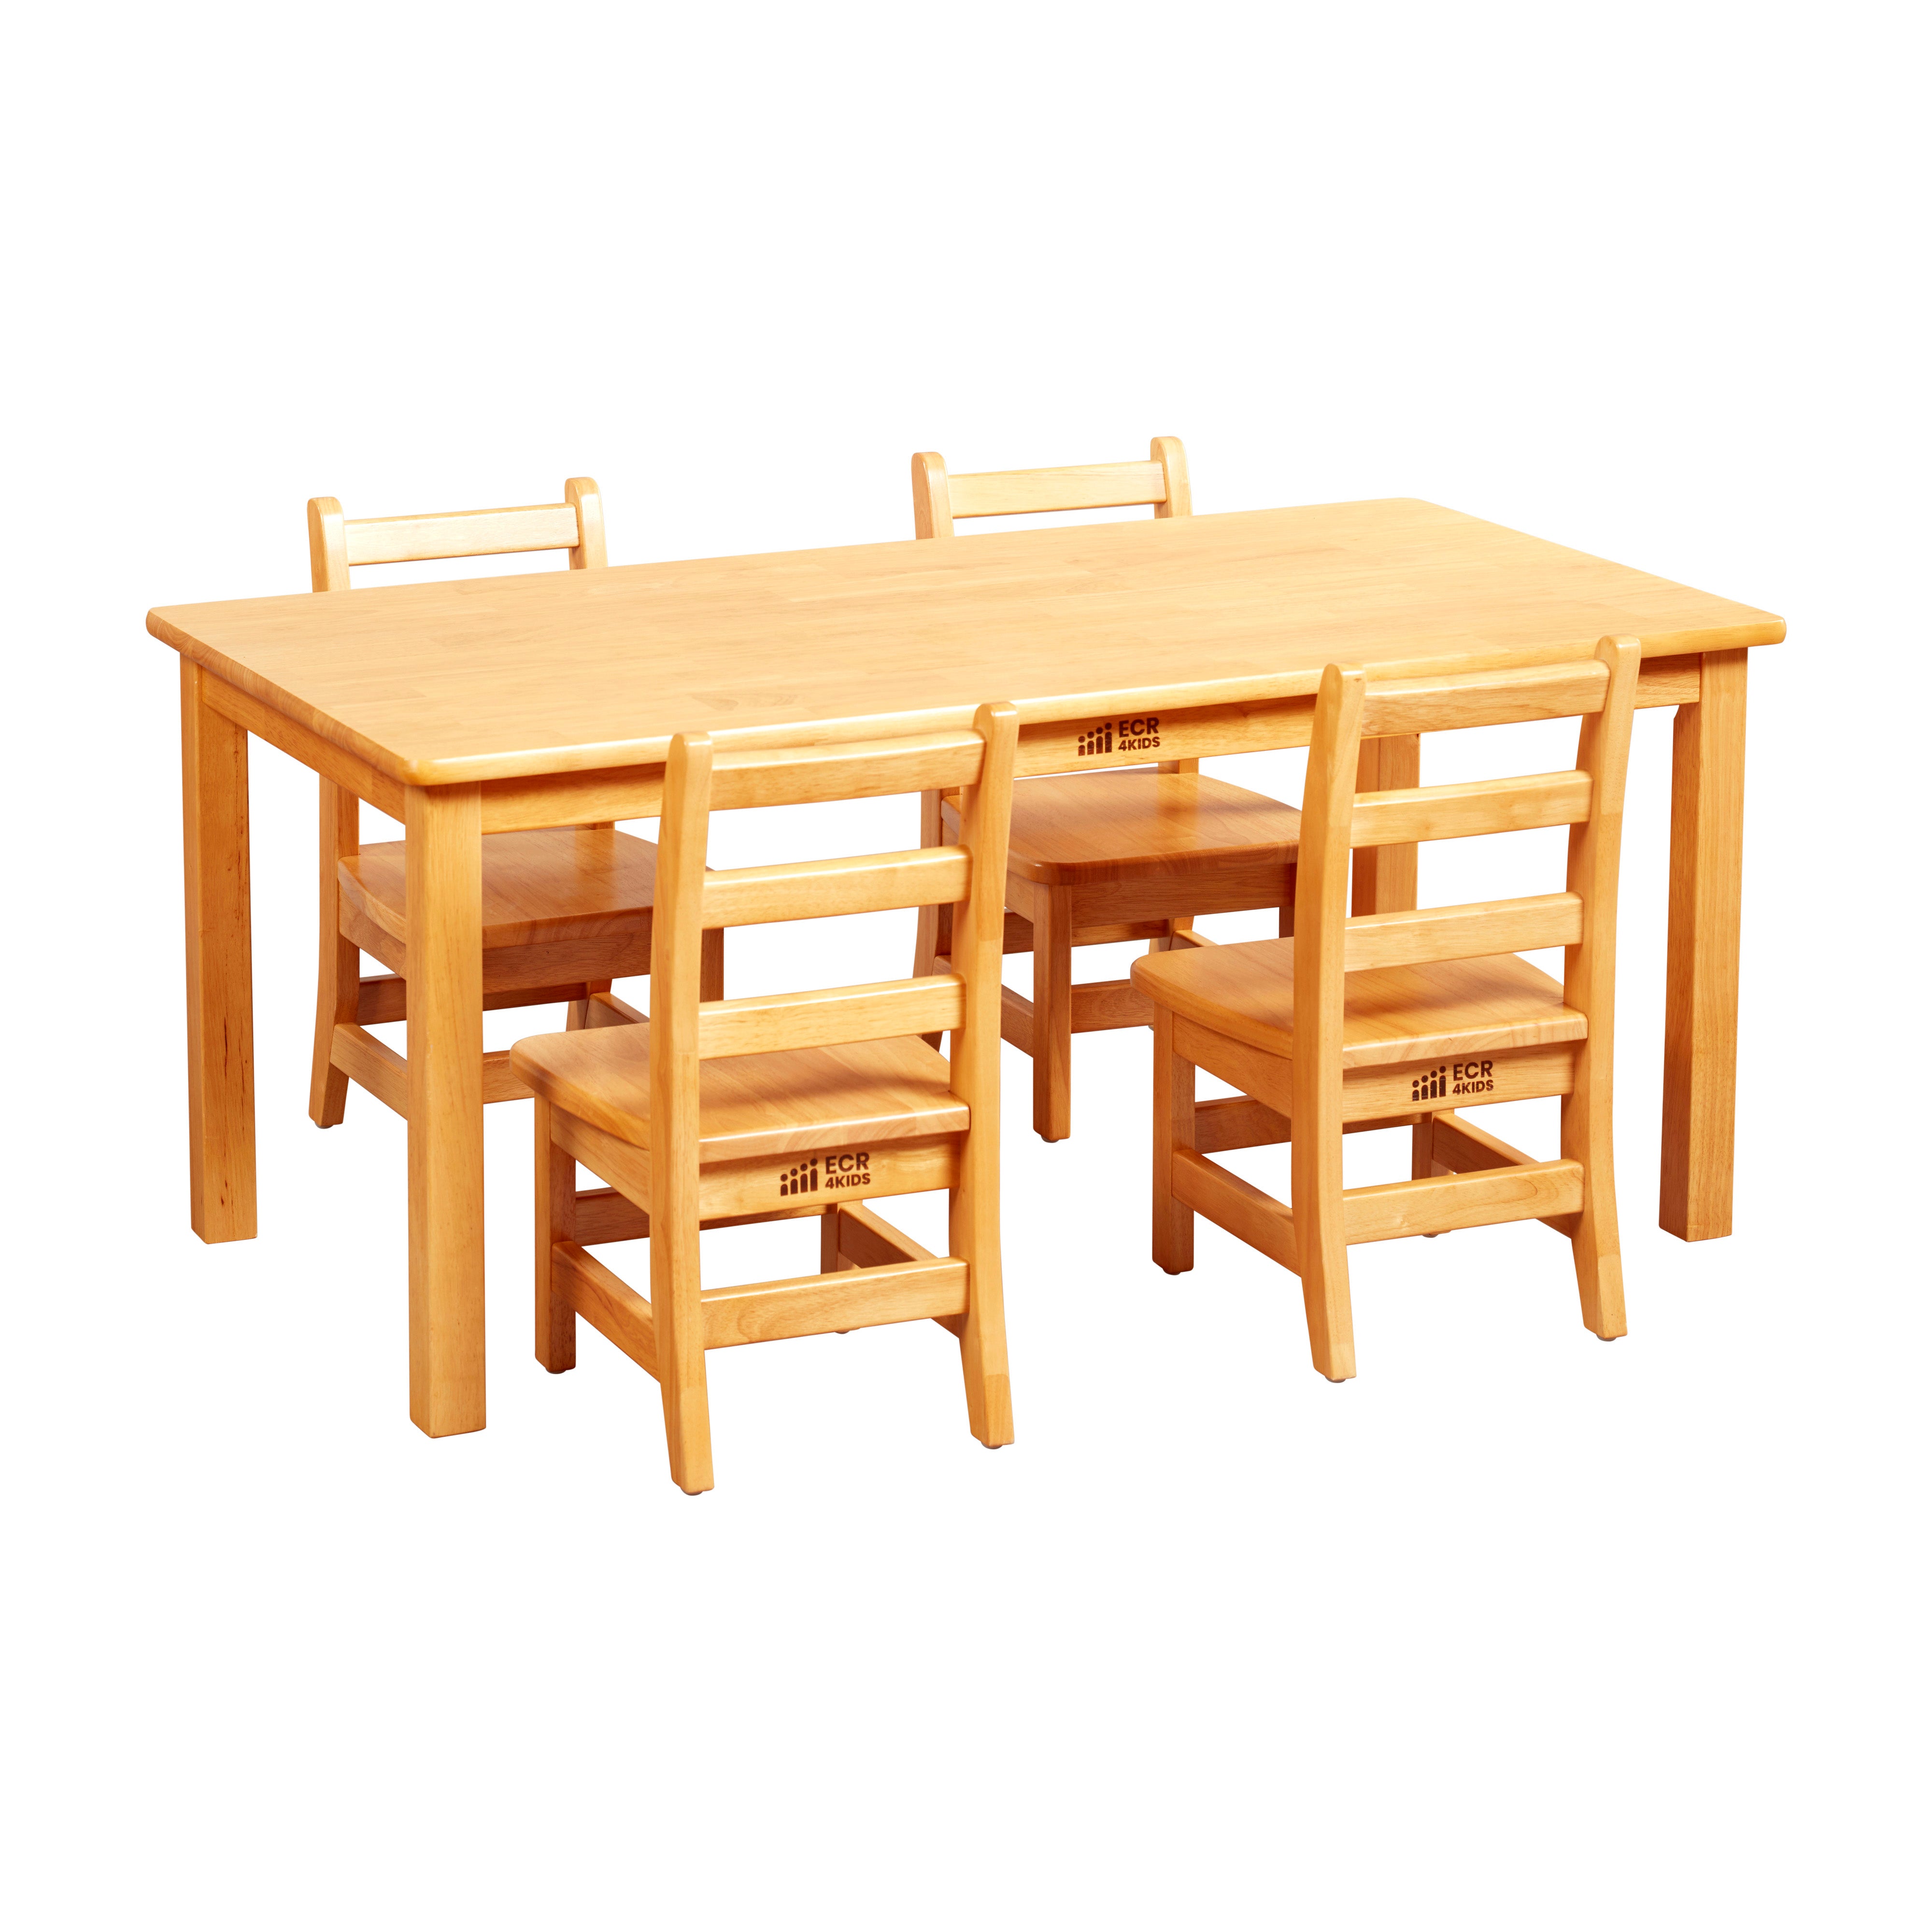 Rectangular Hardwood Table with 20in Legs and Four 10in Chair, Kids Furniture